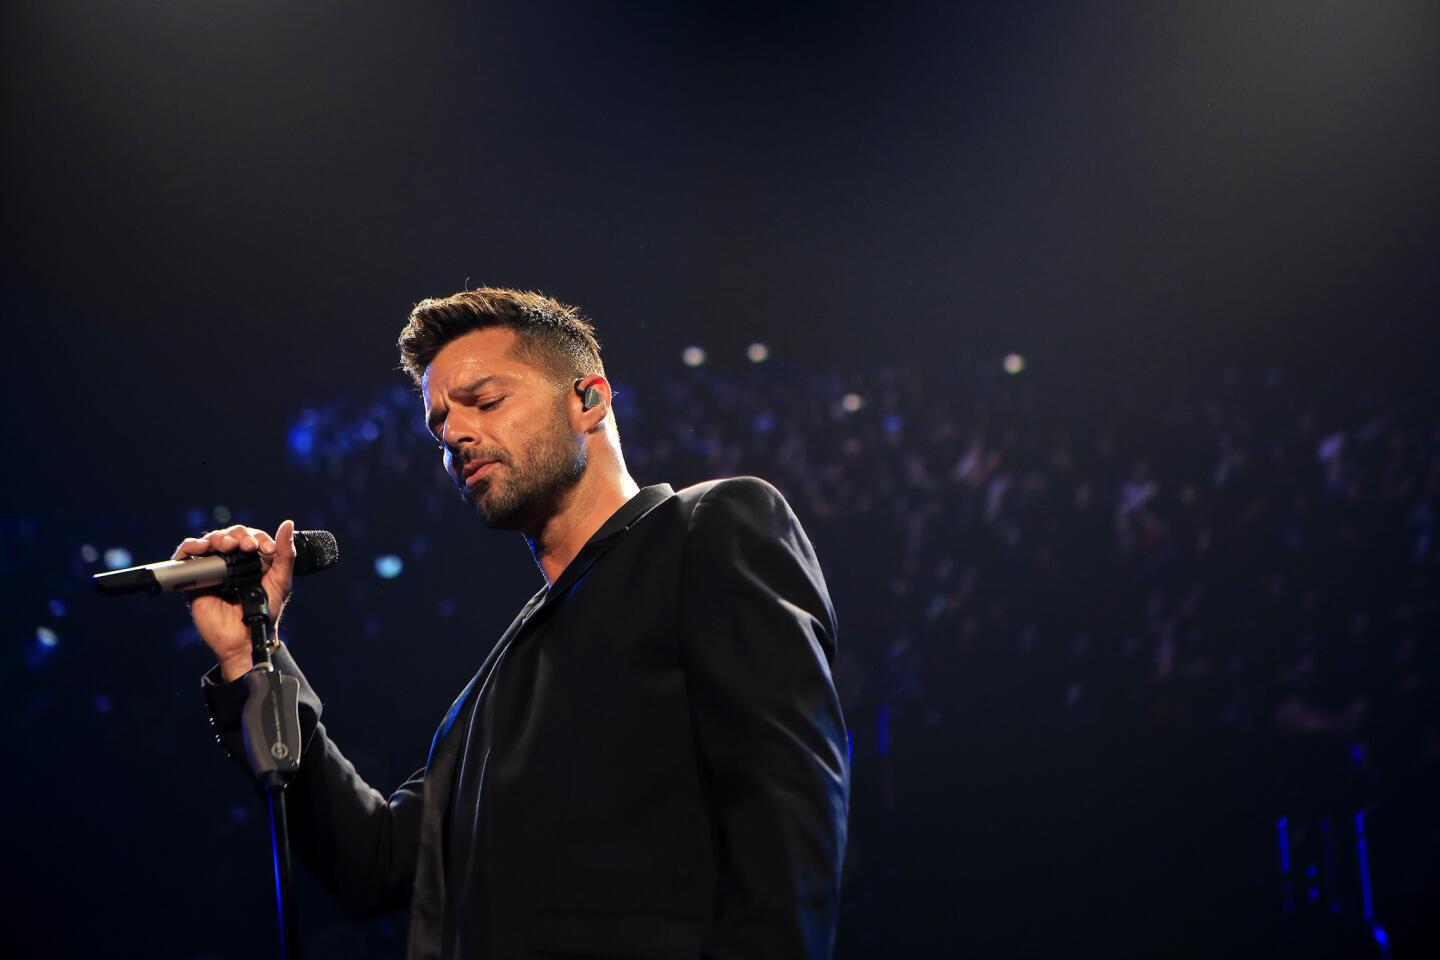 Ricky Martin strikes a pose as he performs at Fiesta Latina at the Forum.